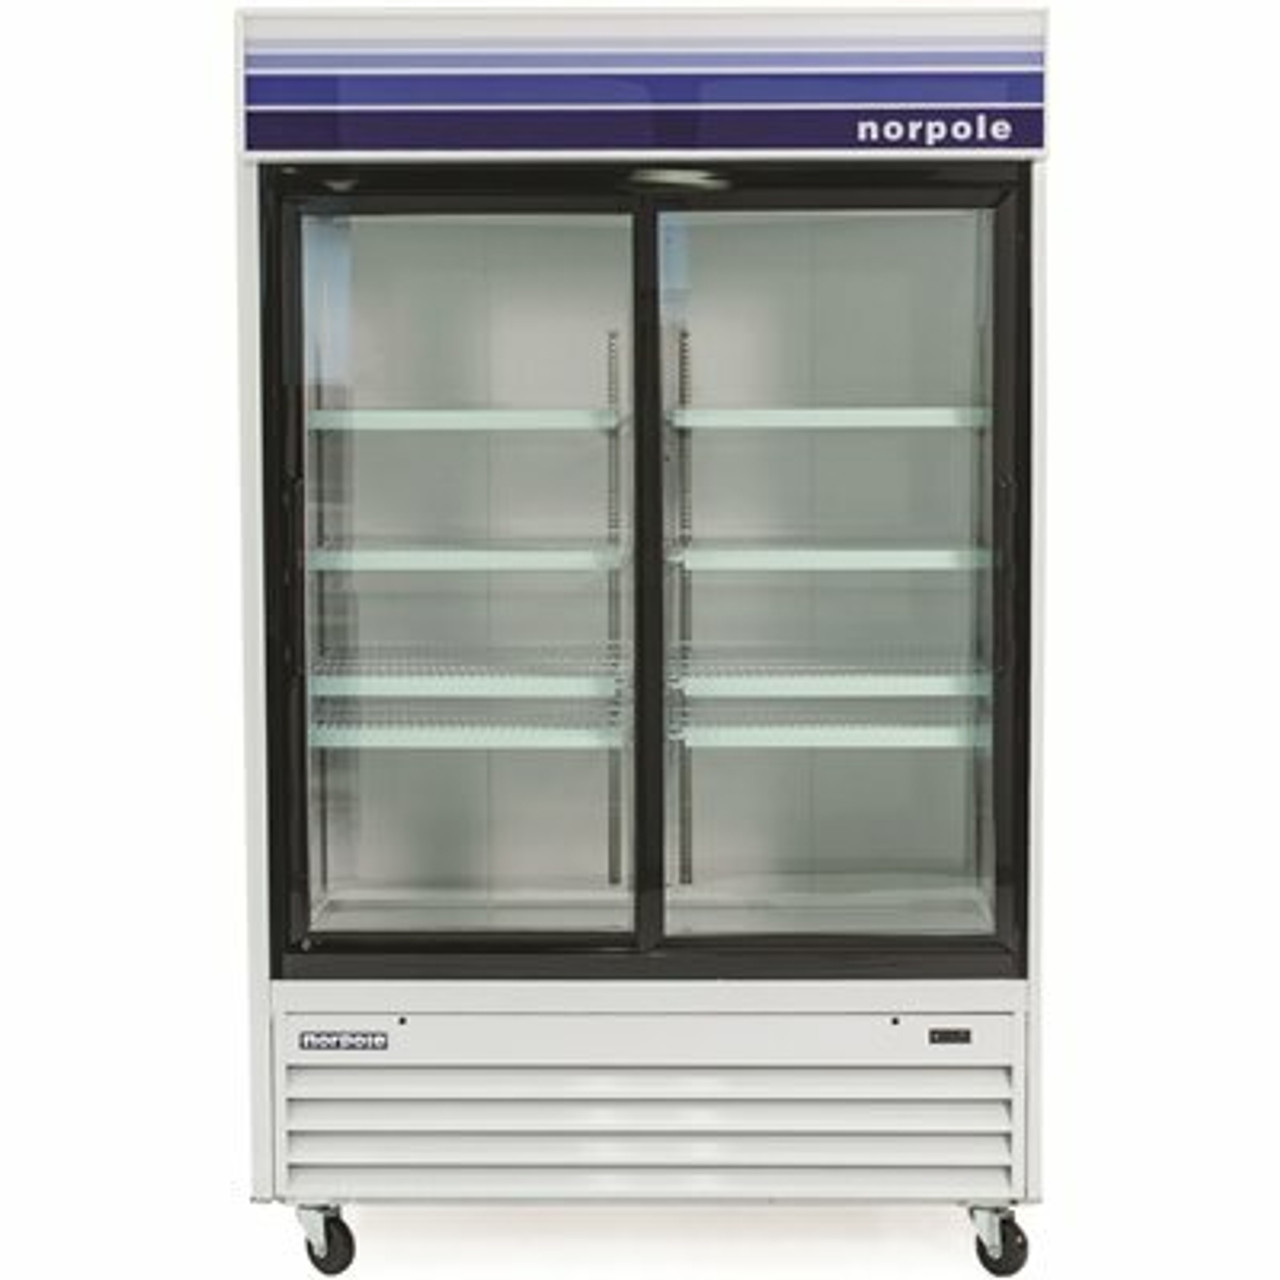 Norpole 53 In. W 45 Cu. Ft. Glass Door Commercial Refrigerator In White And Black